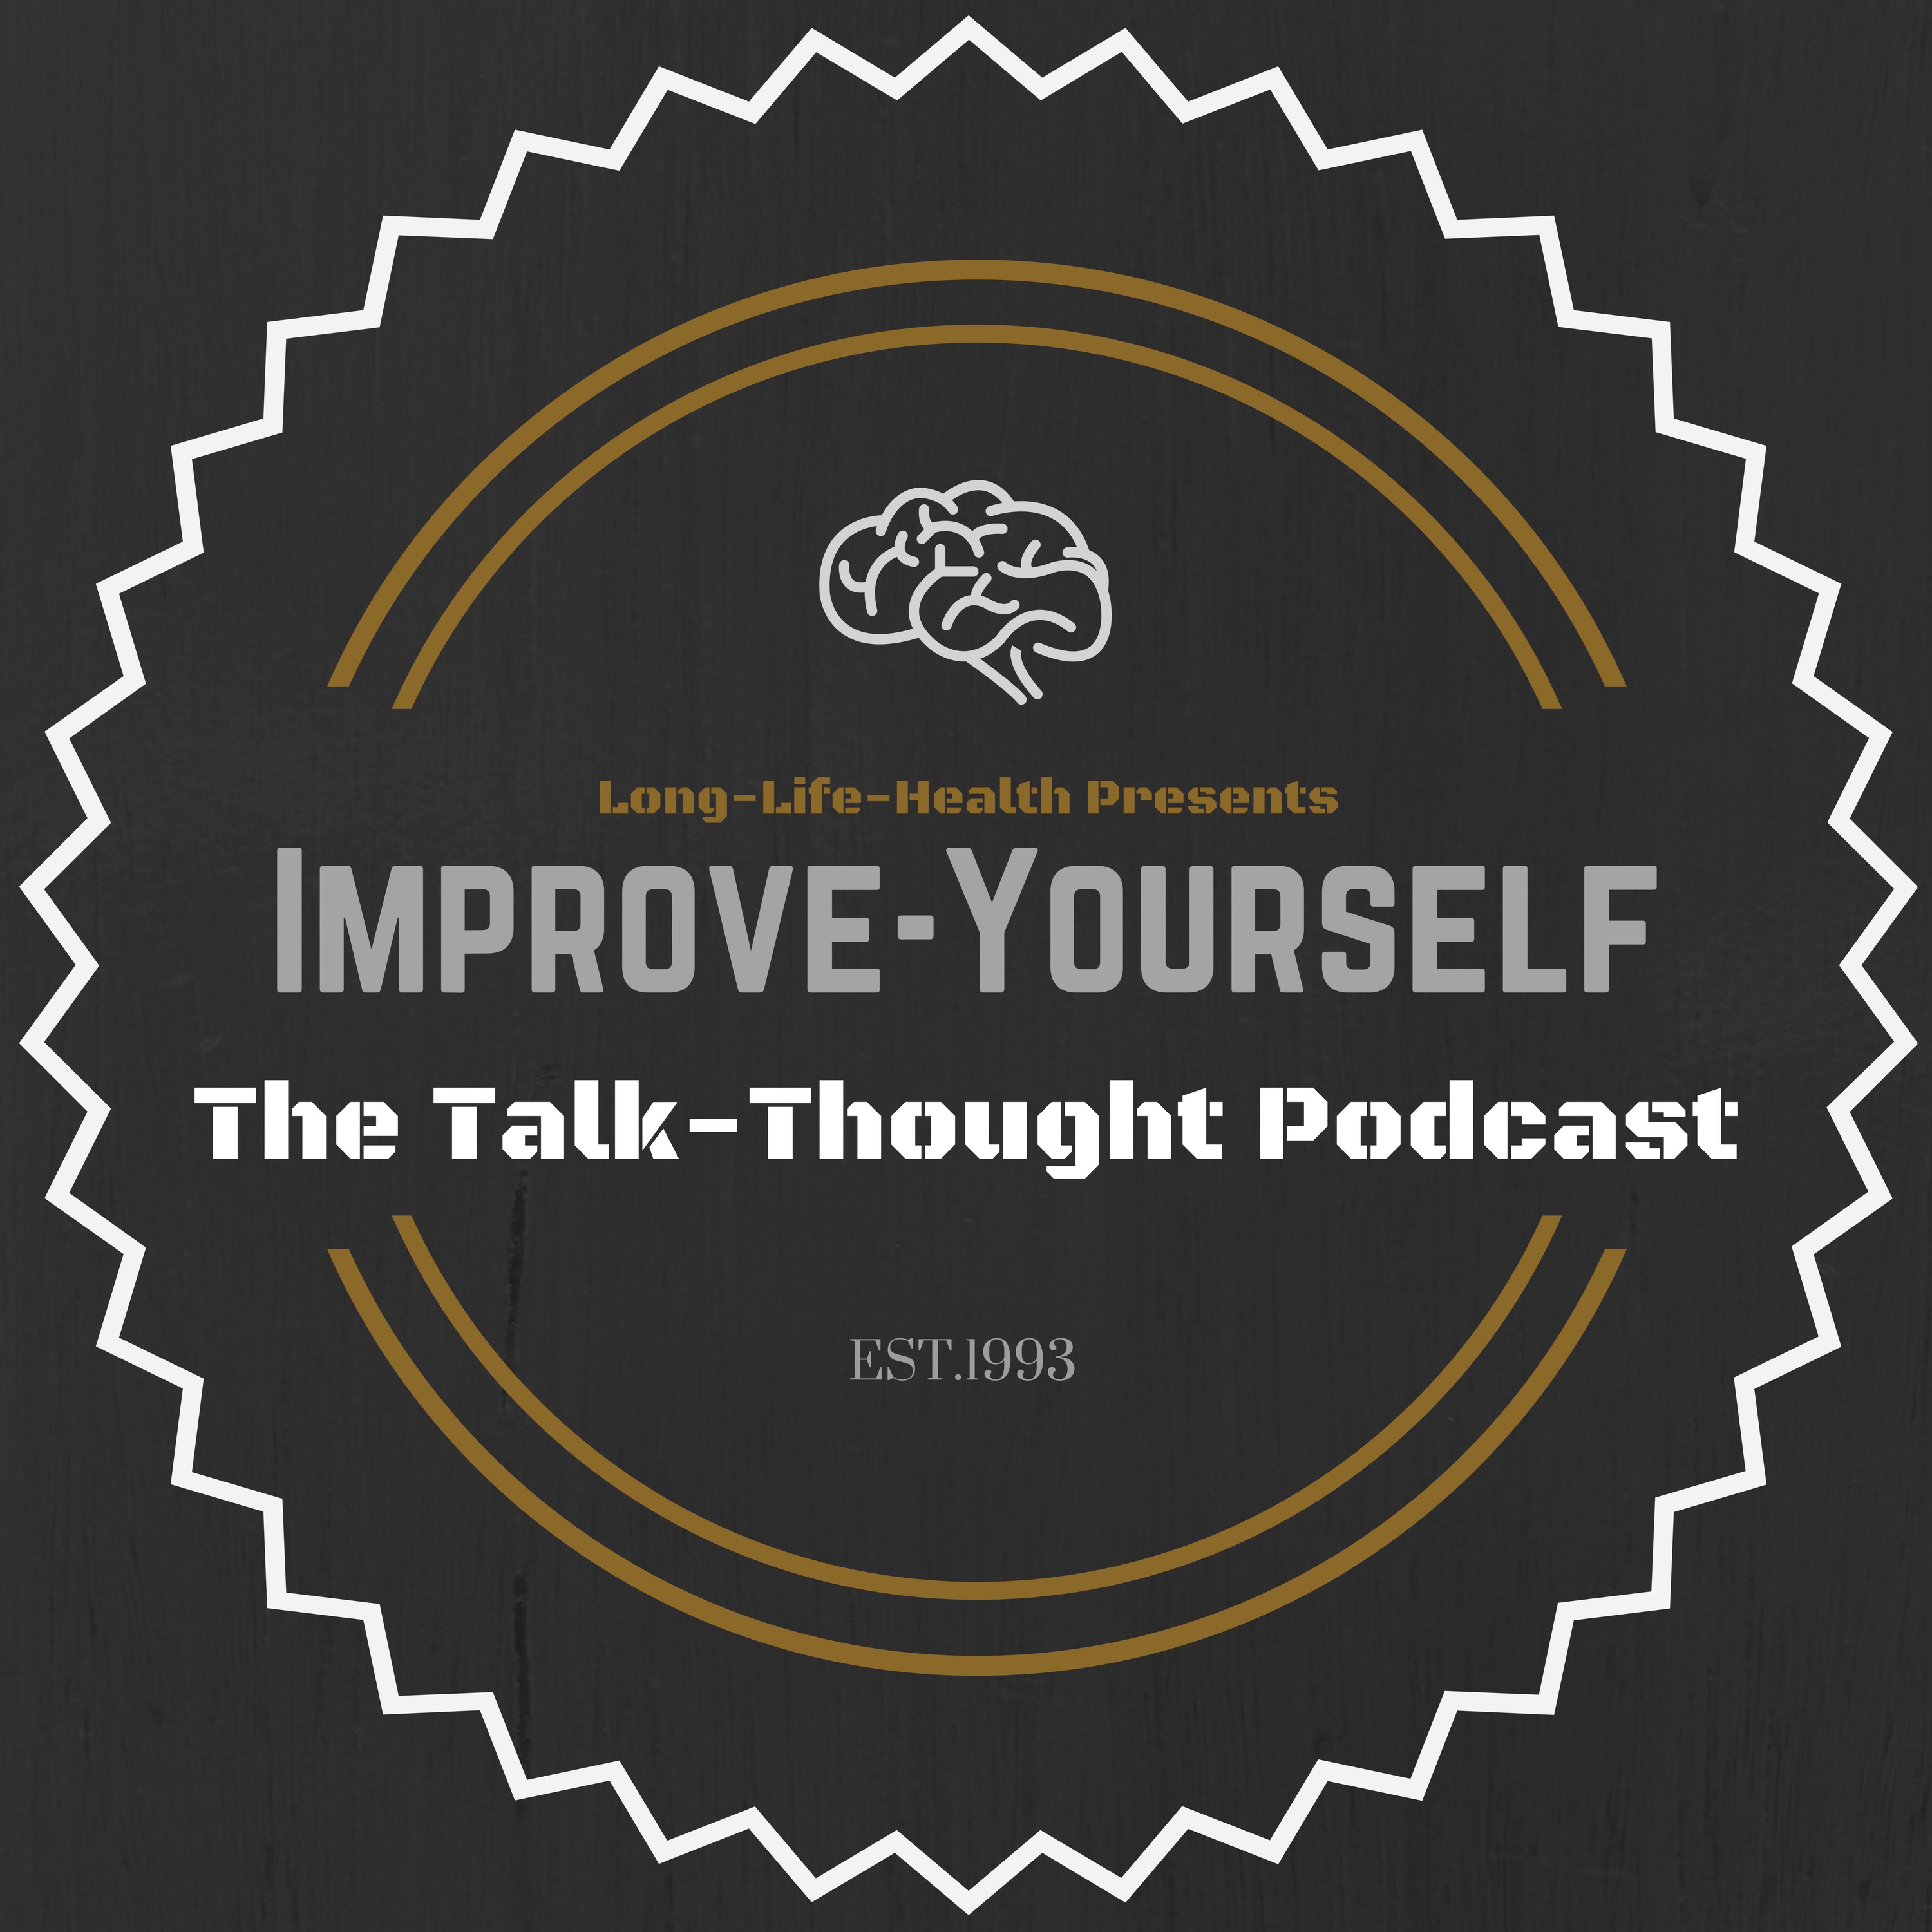 The Talk-Thought Podcast